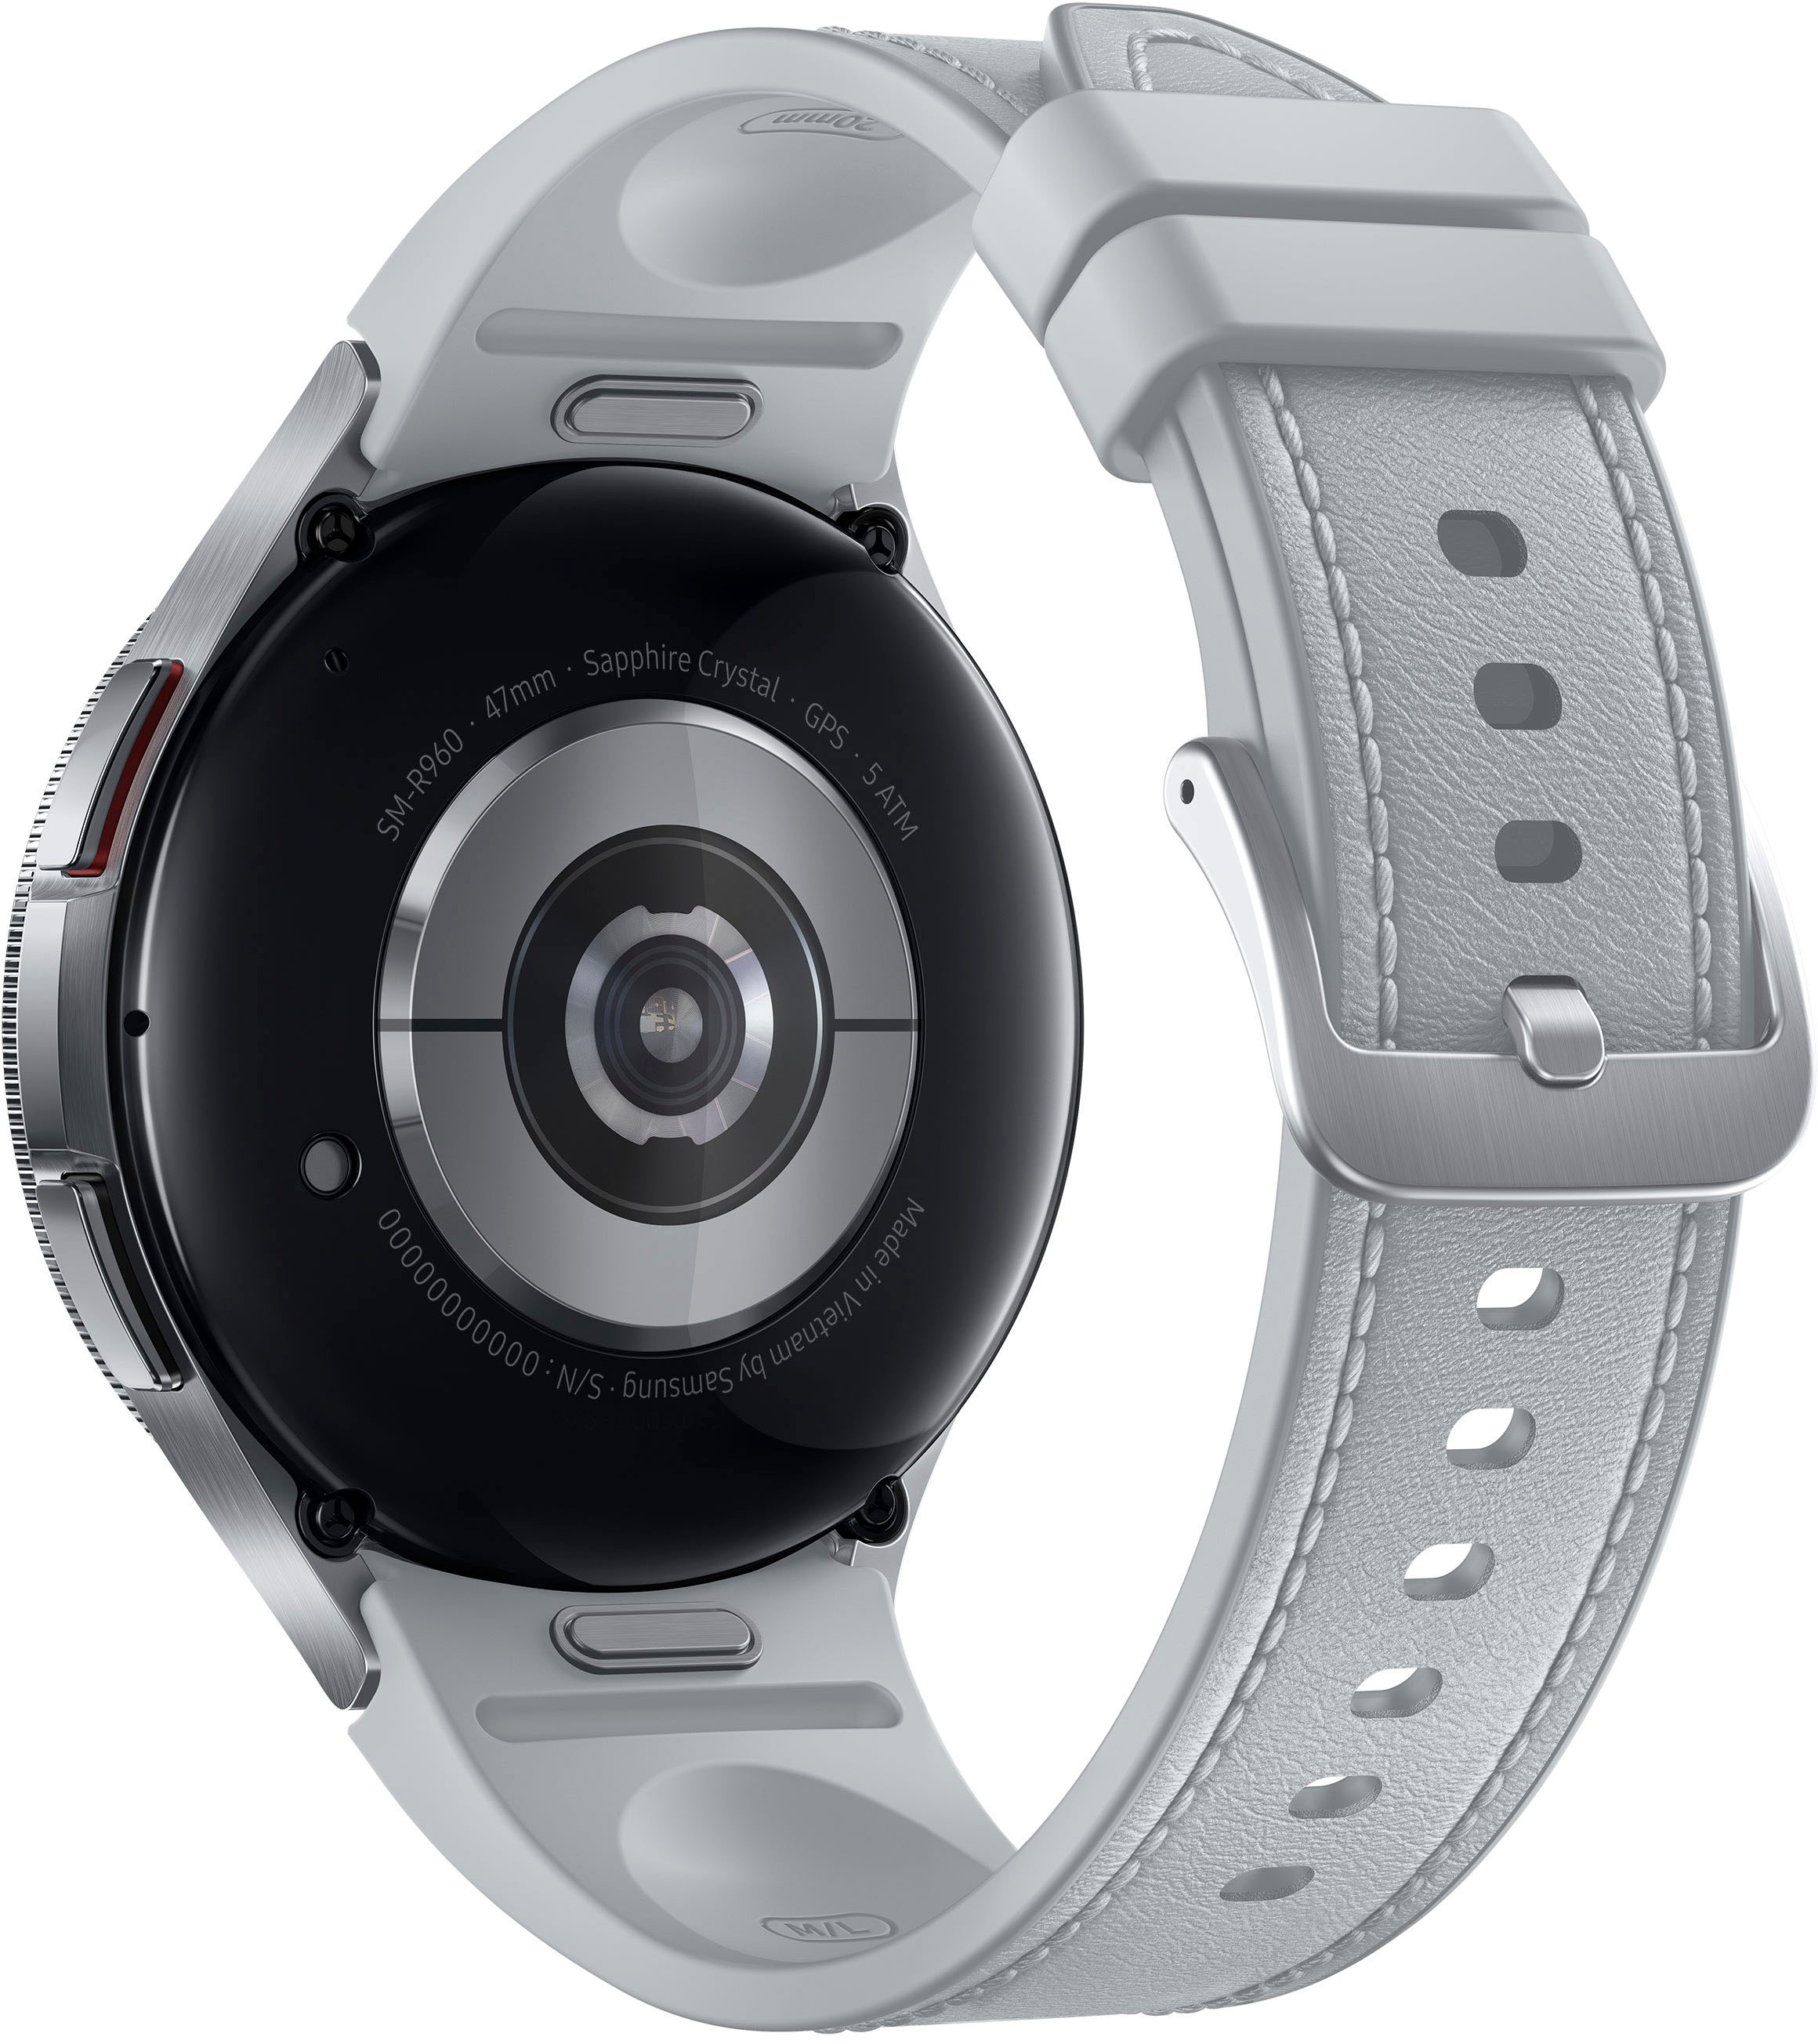 Samsung Galaxy Watch Samsung Galaxy Watch Smart Watches for sale